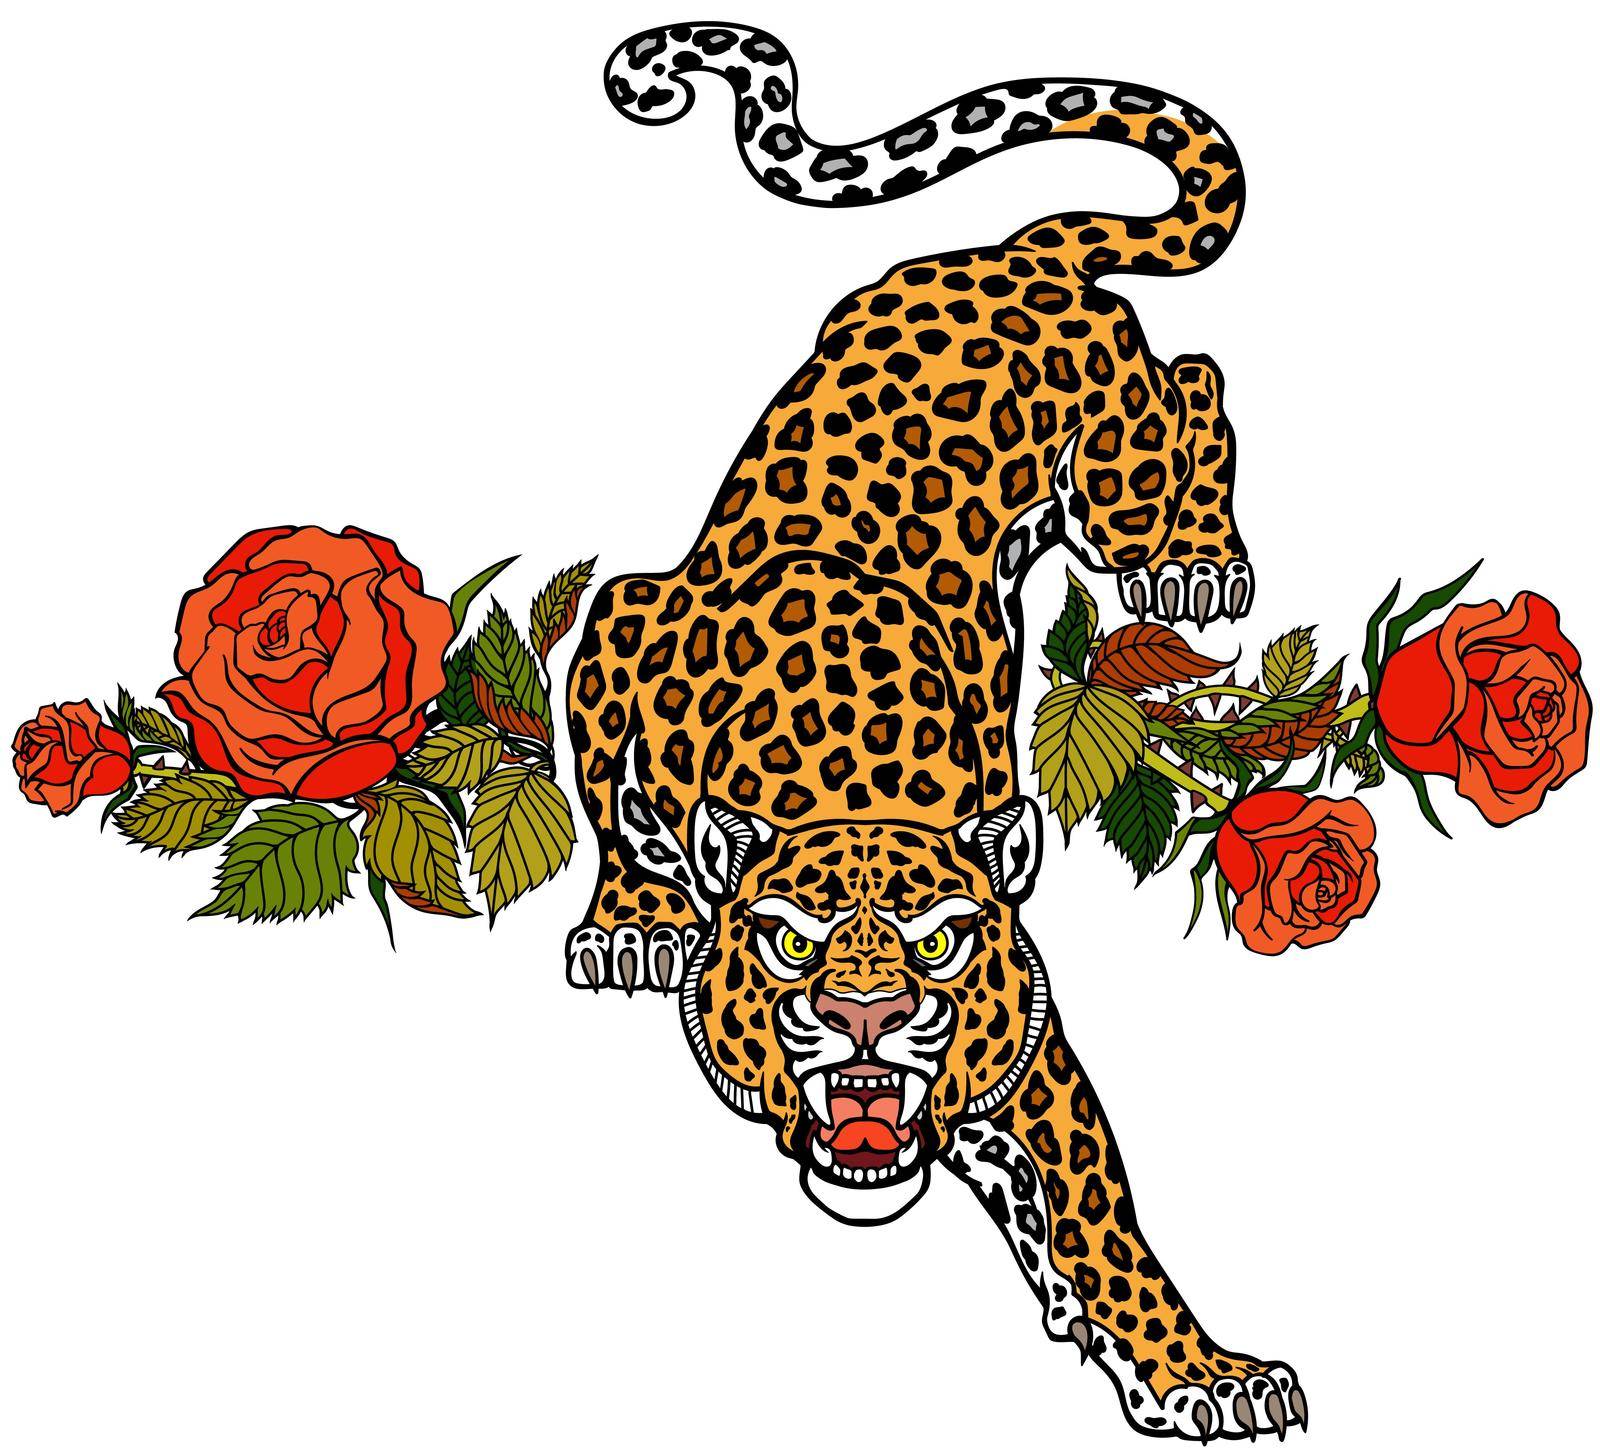 The roaring leopard climbs down and looks straight ahead. Aggressive spotted panther and blooming red roses. Front view. Tattoo style vector illustration